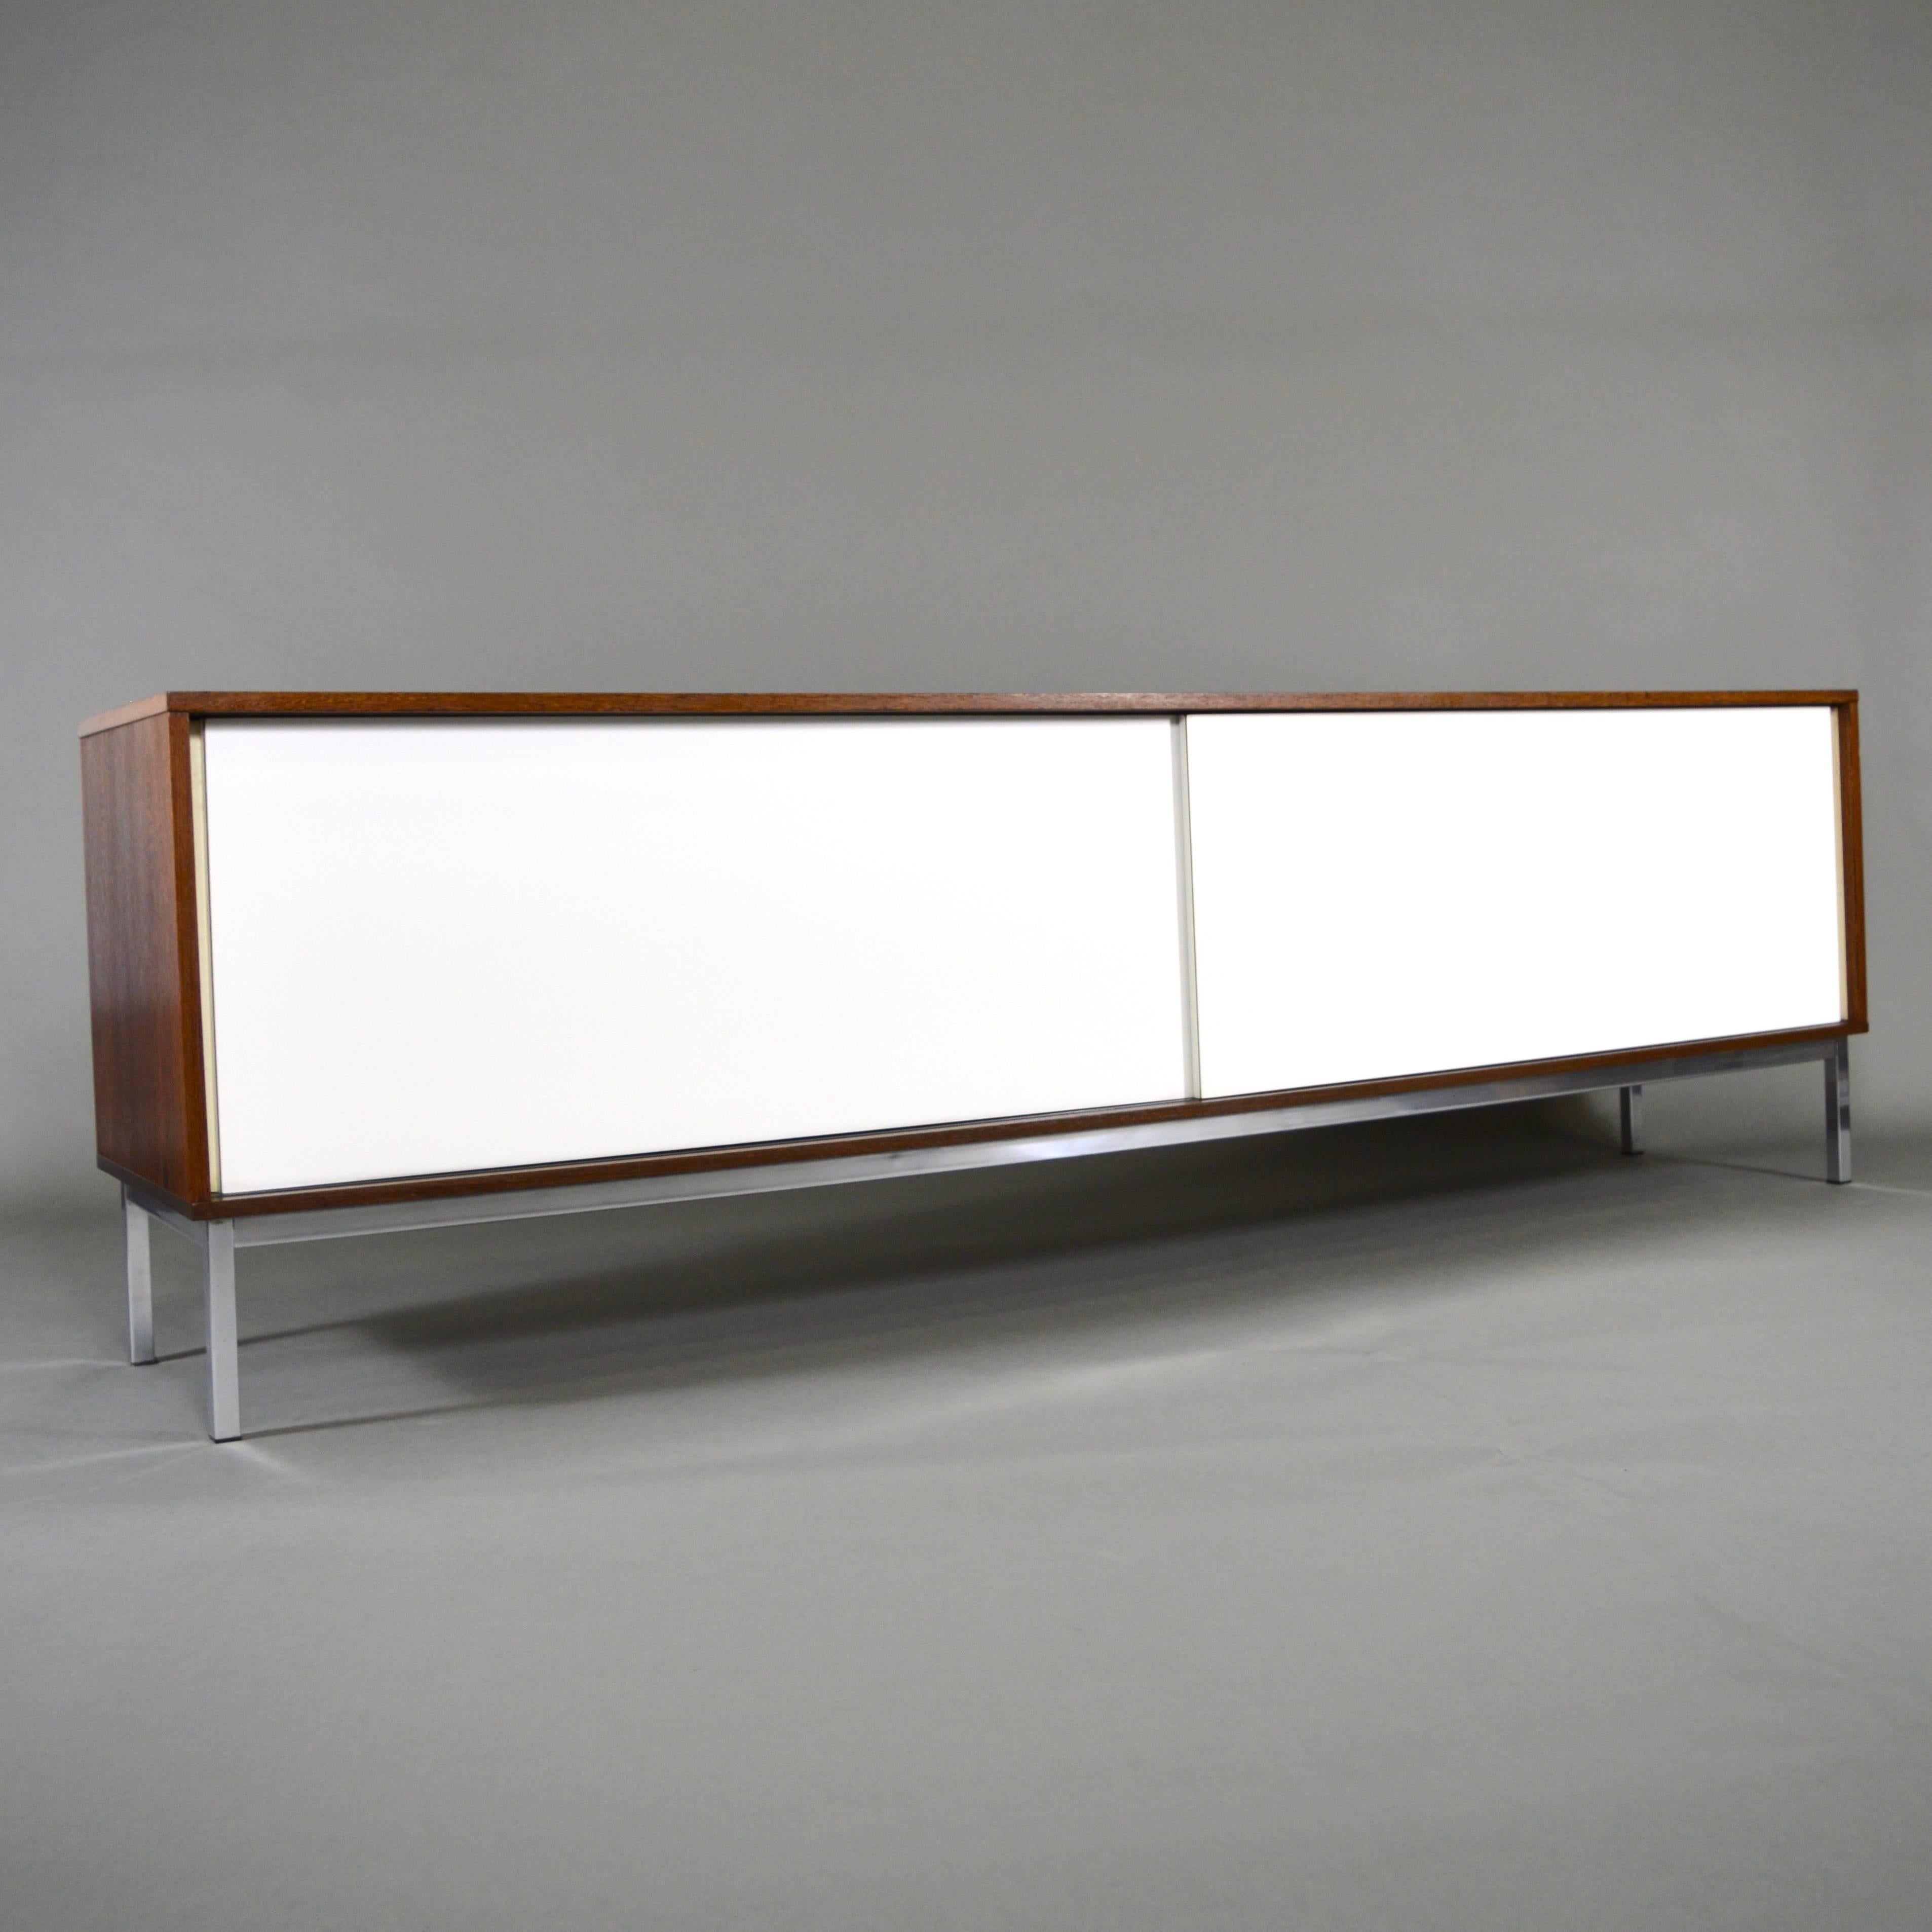 Modernistic and minimalistic designed sideboard by Martin Visser for 't Spectrum Bergeijk - Netherlands, 1960s.
The sideboard is made of Wenge and white laminated sliding doors. The interior has four shelves that are adjustable in height and one